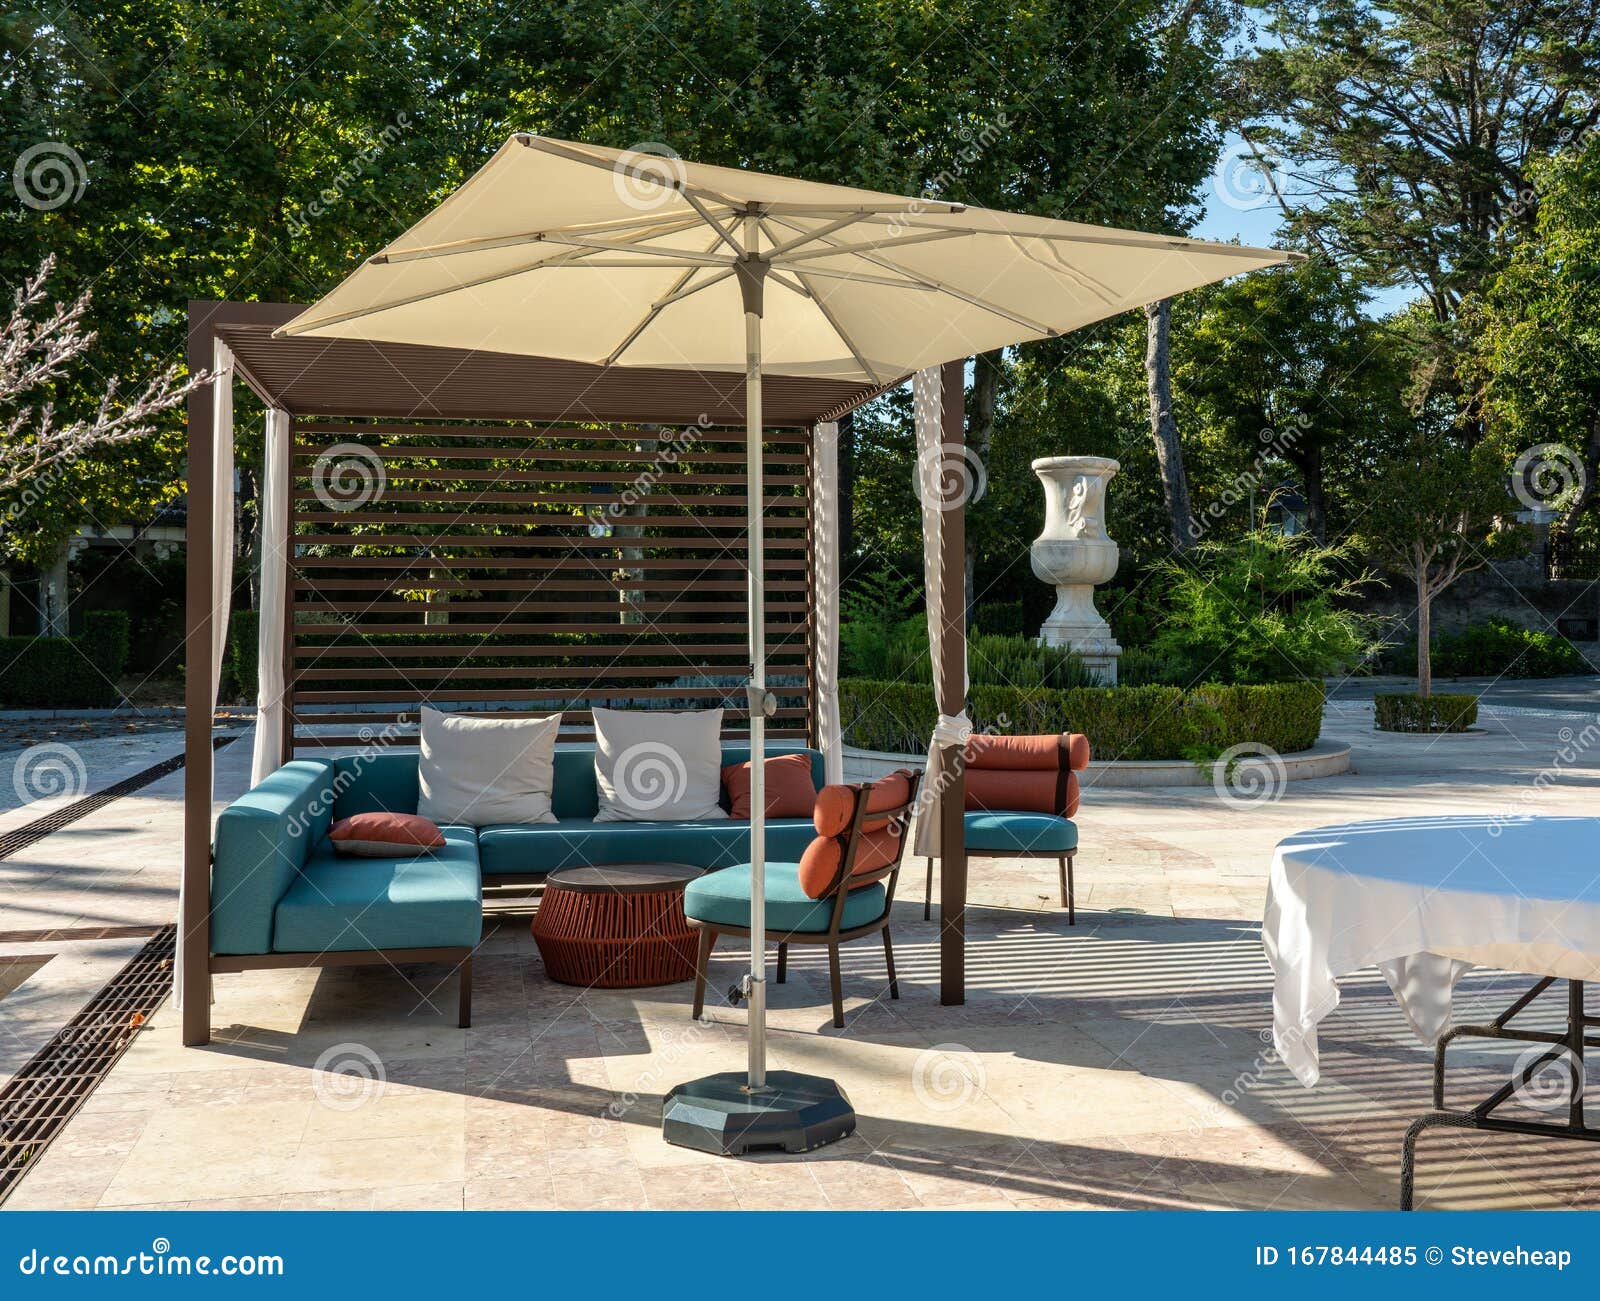 Outdoor Lounging Chairs And Seats On Patio In Garden Stock Image Image Of Luxury Parasol 167844485